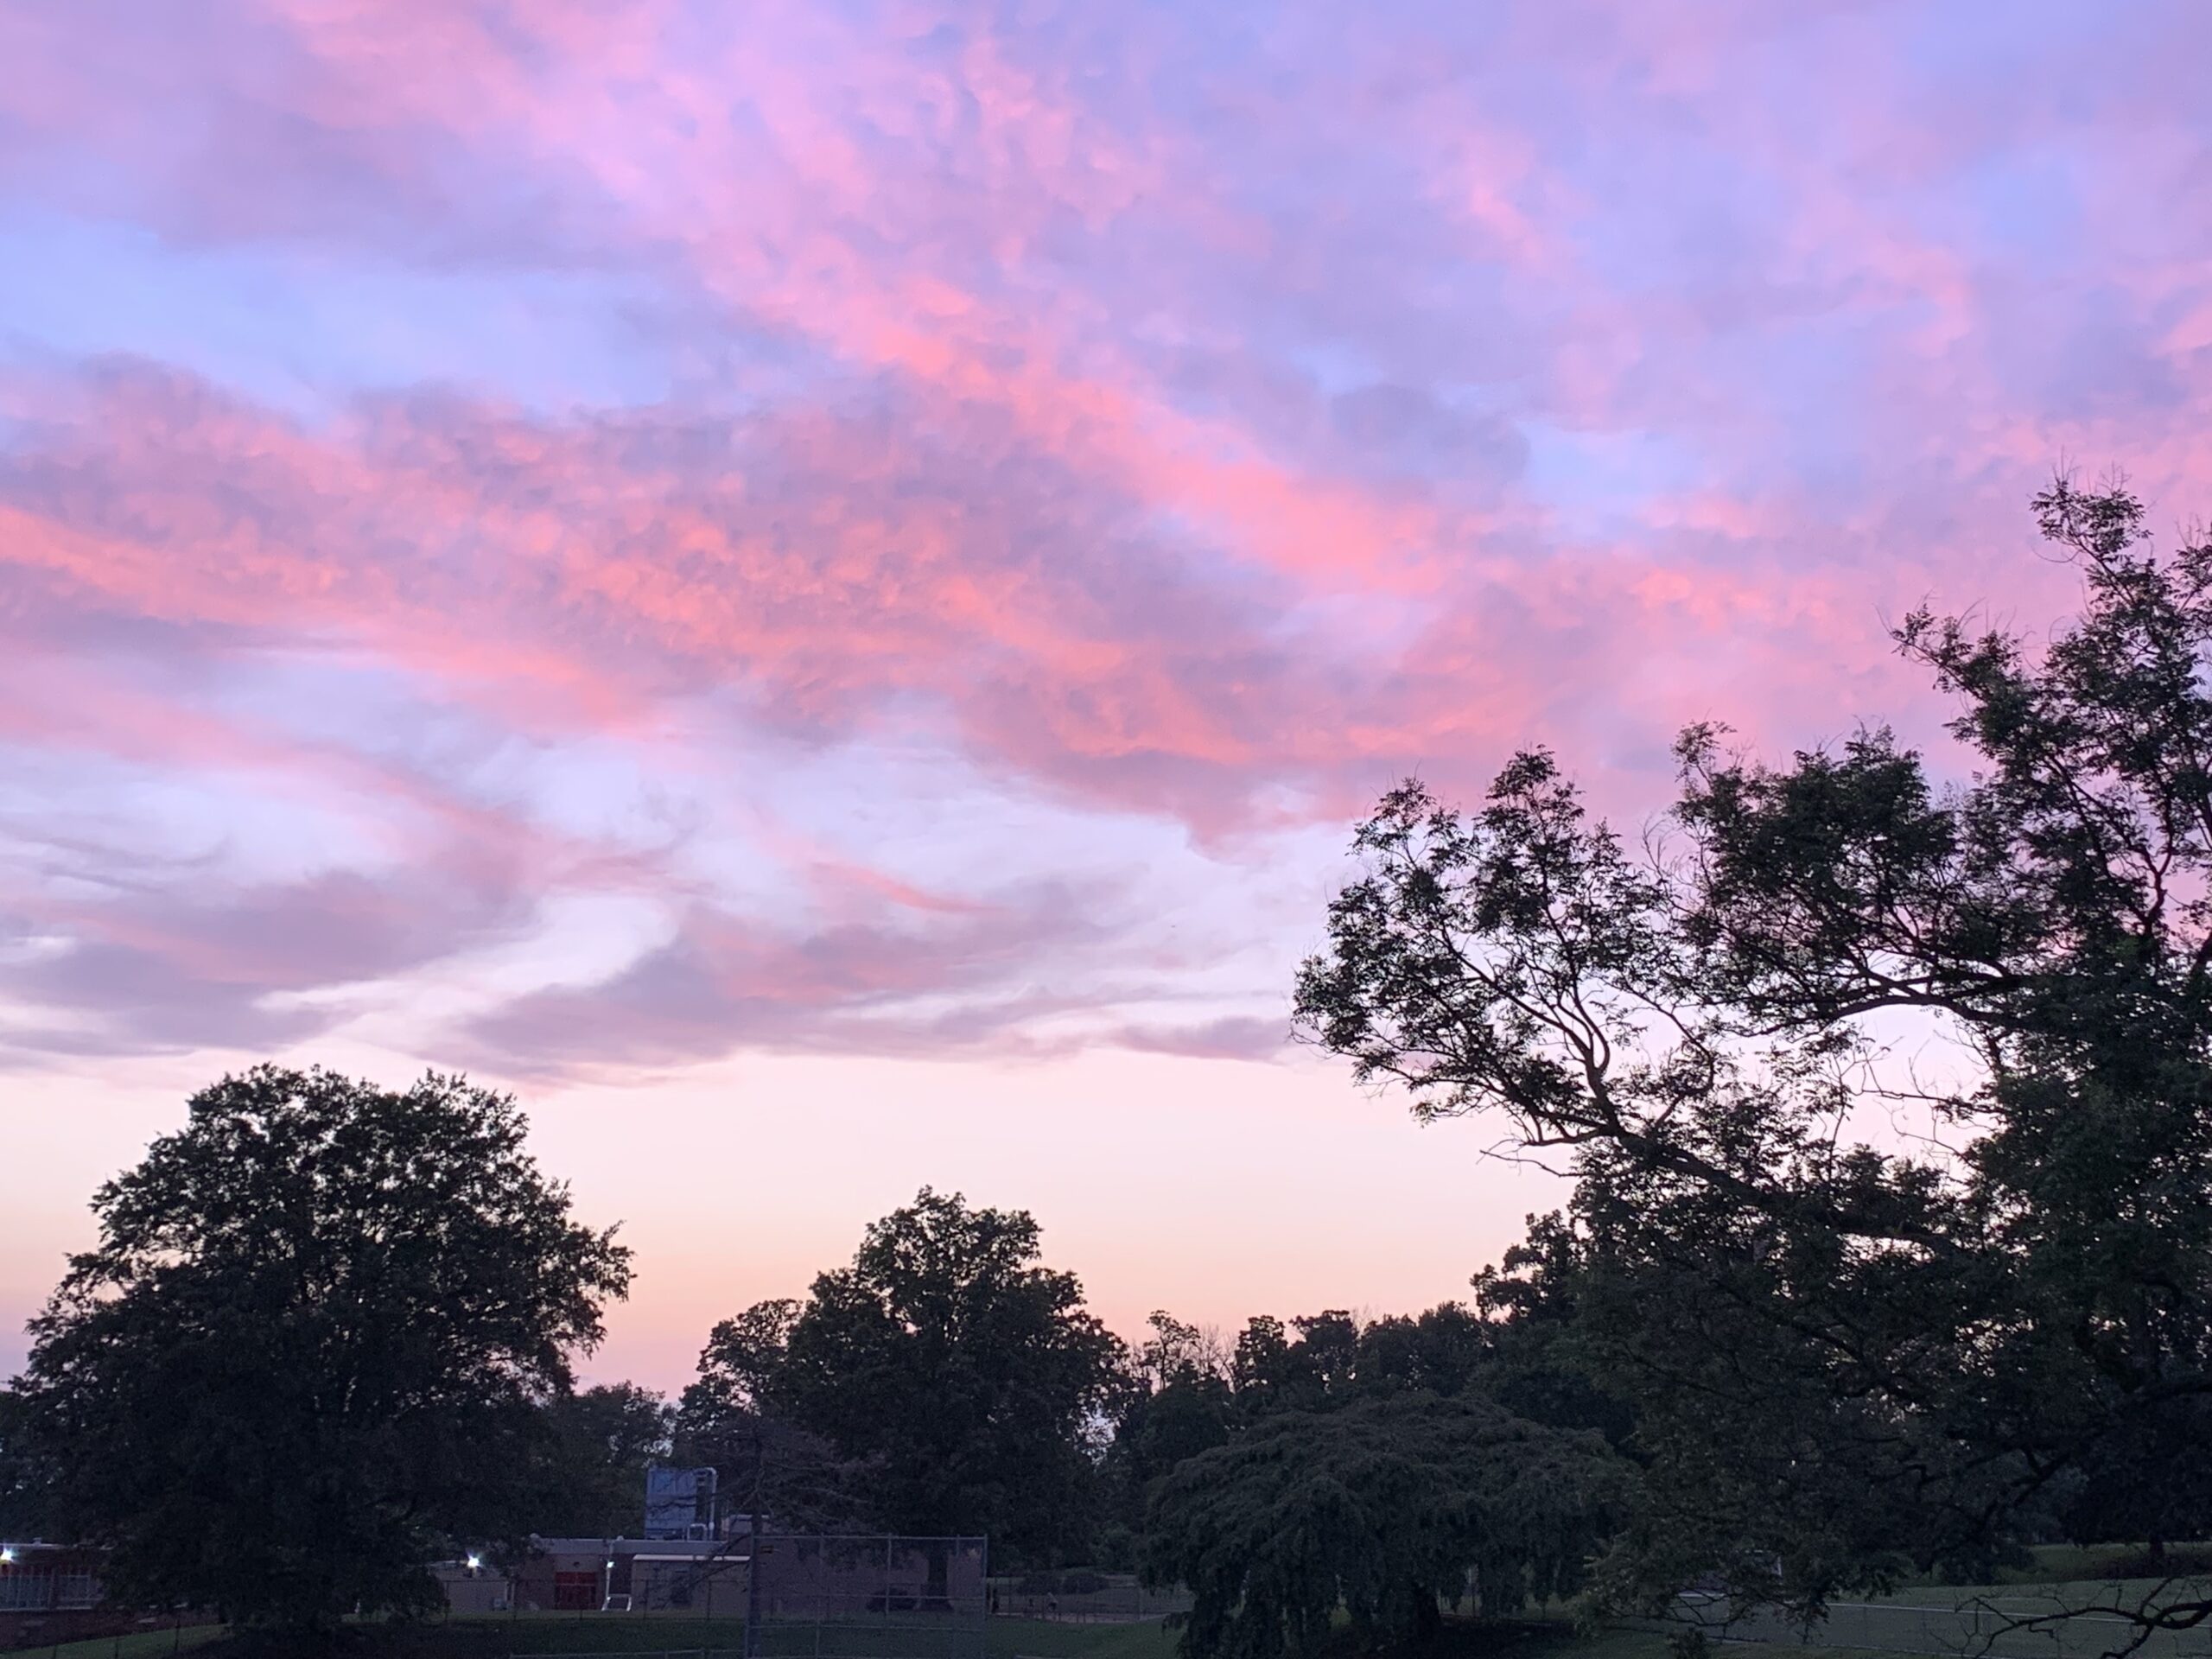 a pink and lilac sky amidst the trees